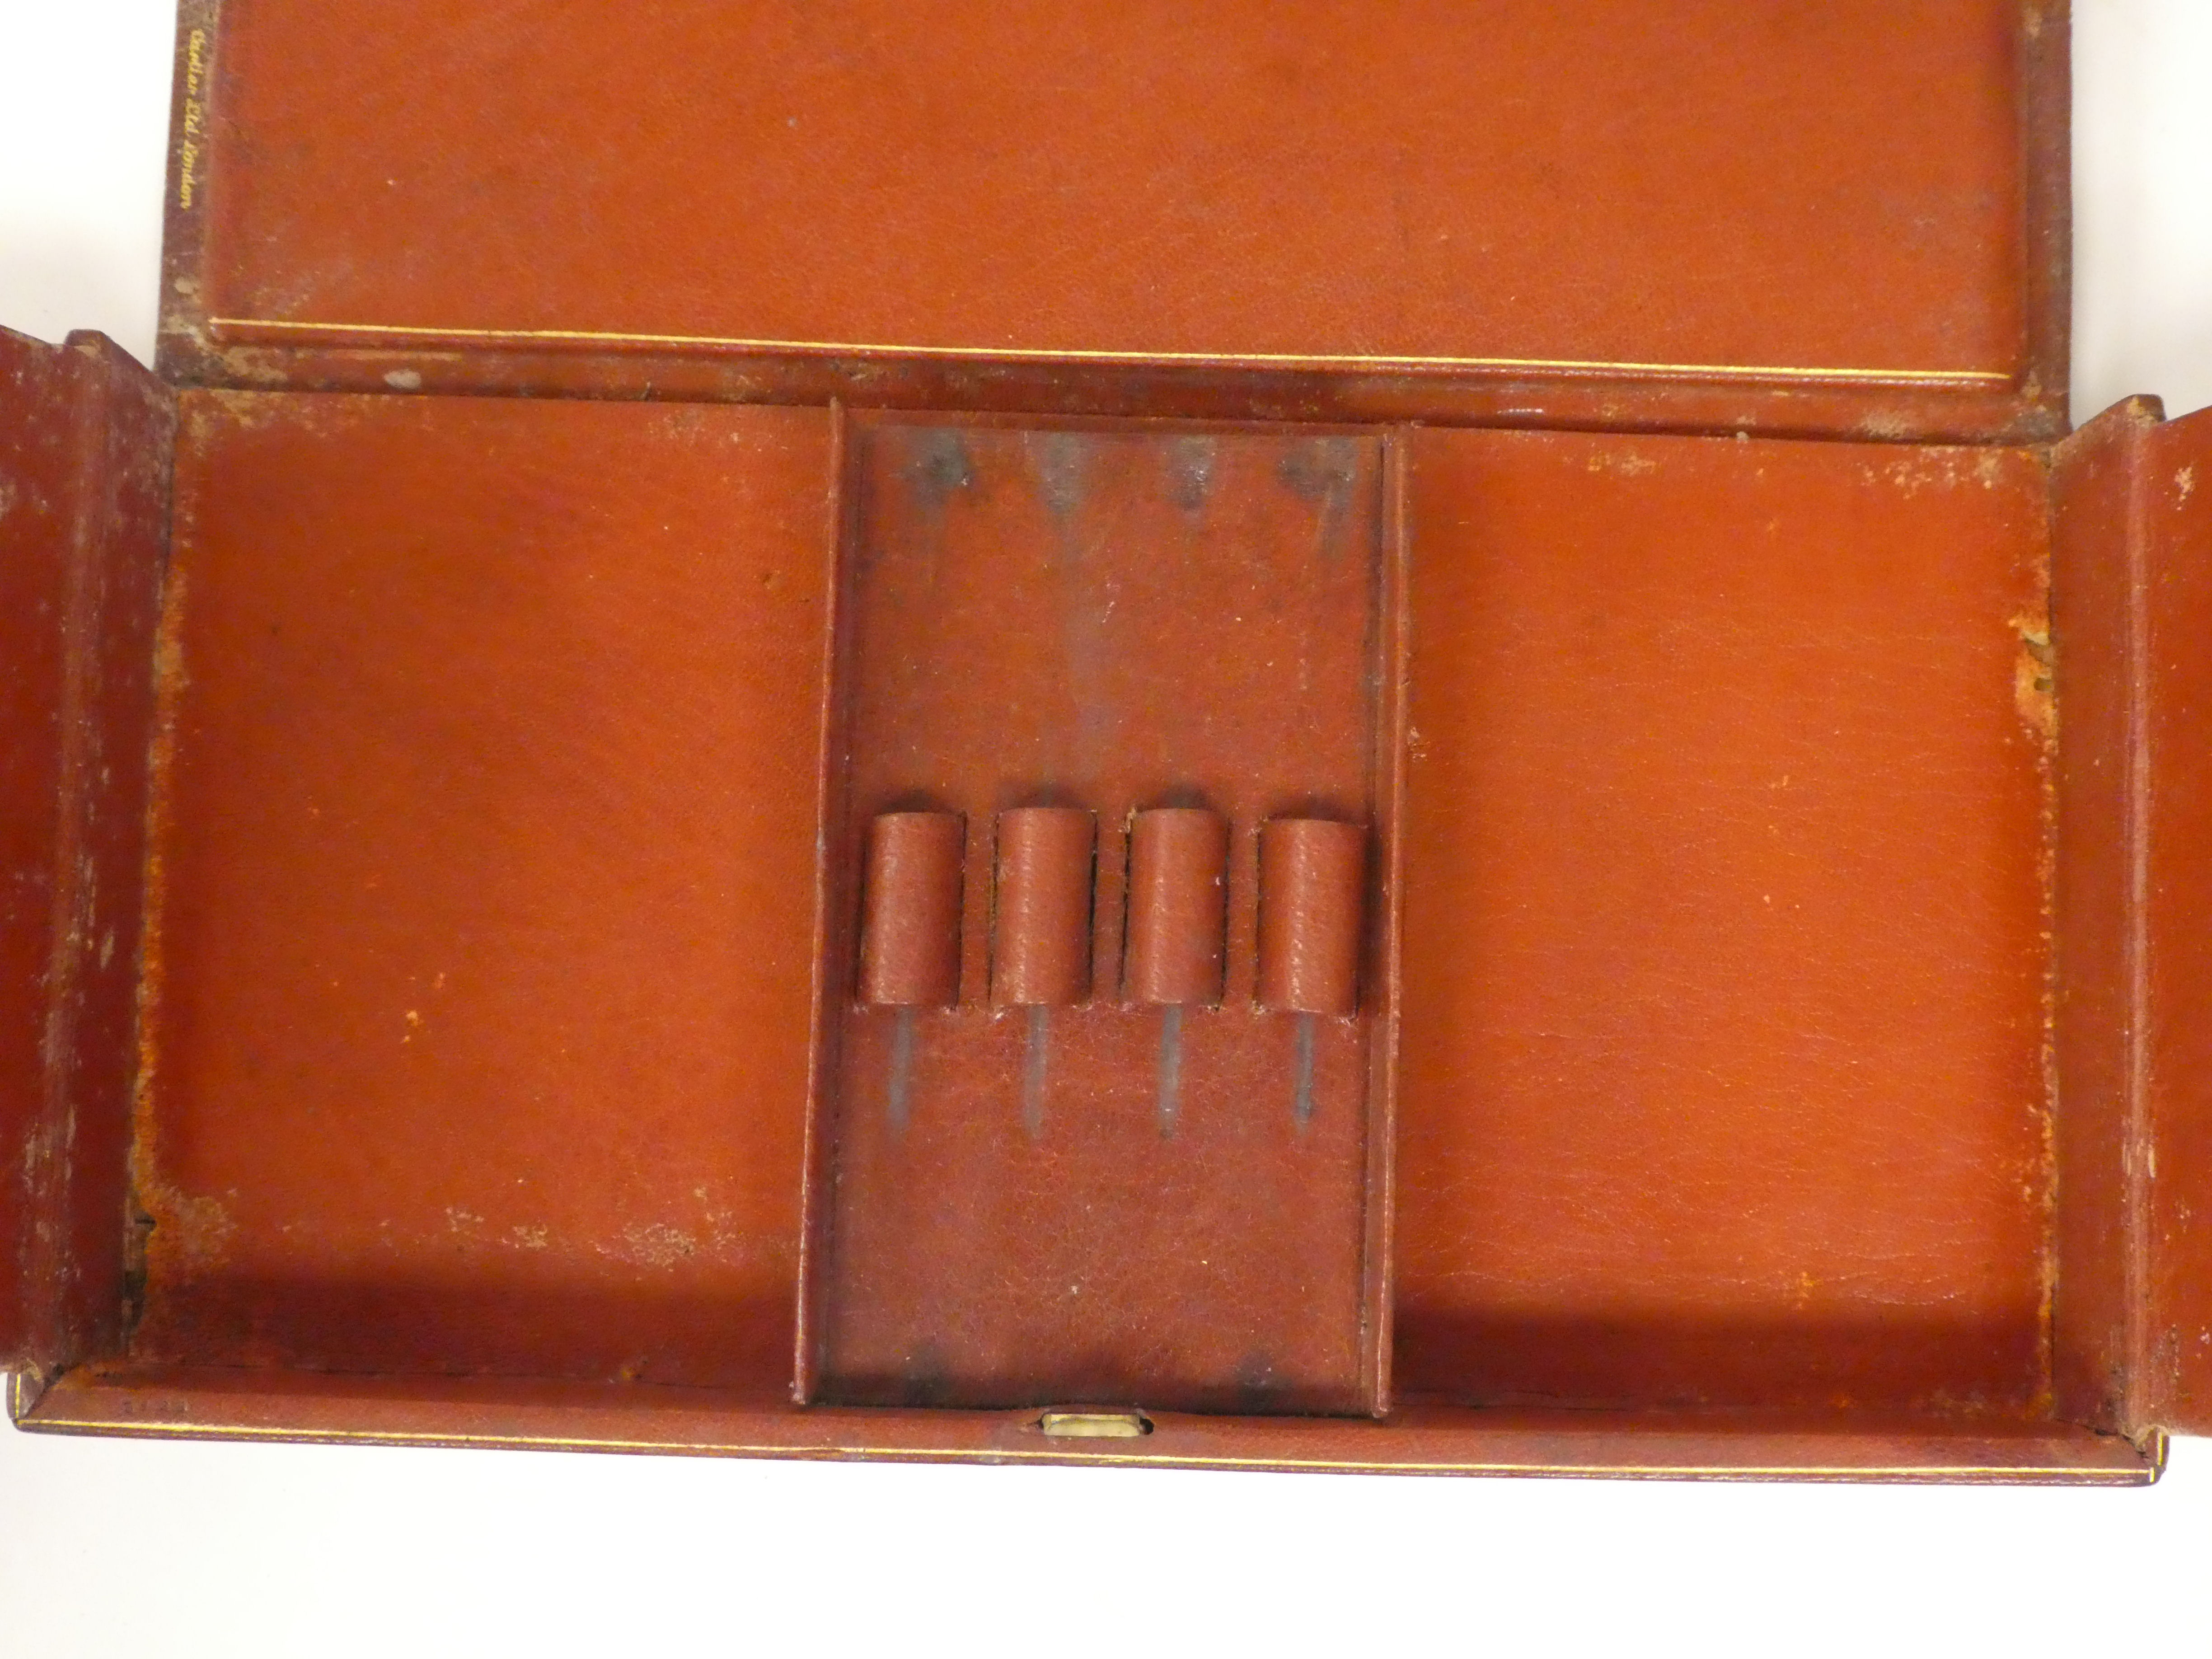 A Cartier Ltd, London gilded red and brown hide Bridge box, fashioned as a book with a fitted - Image 6 of 6